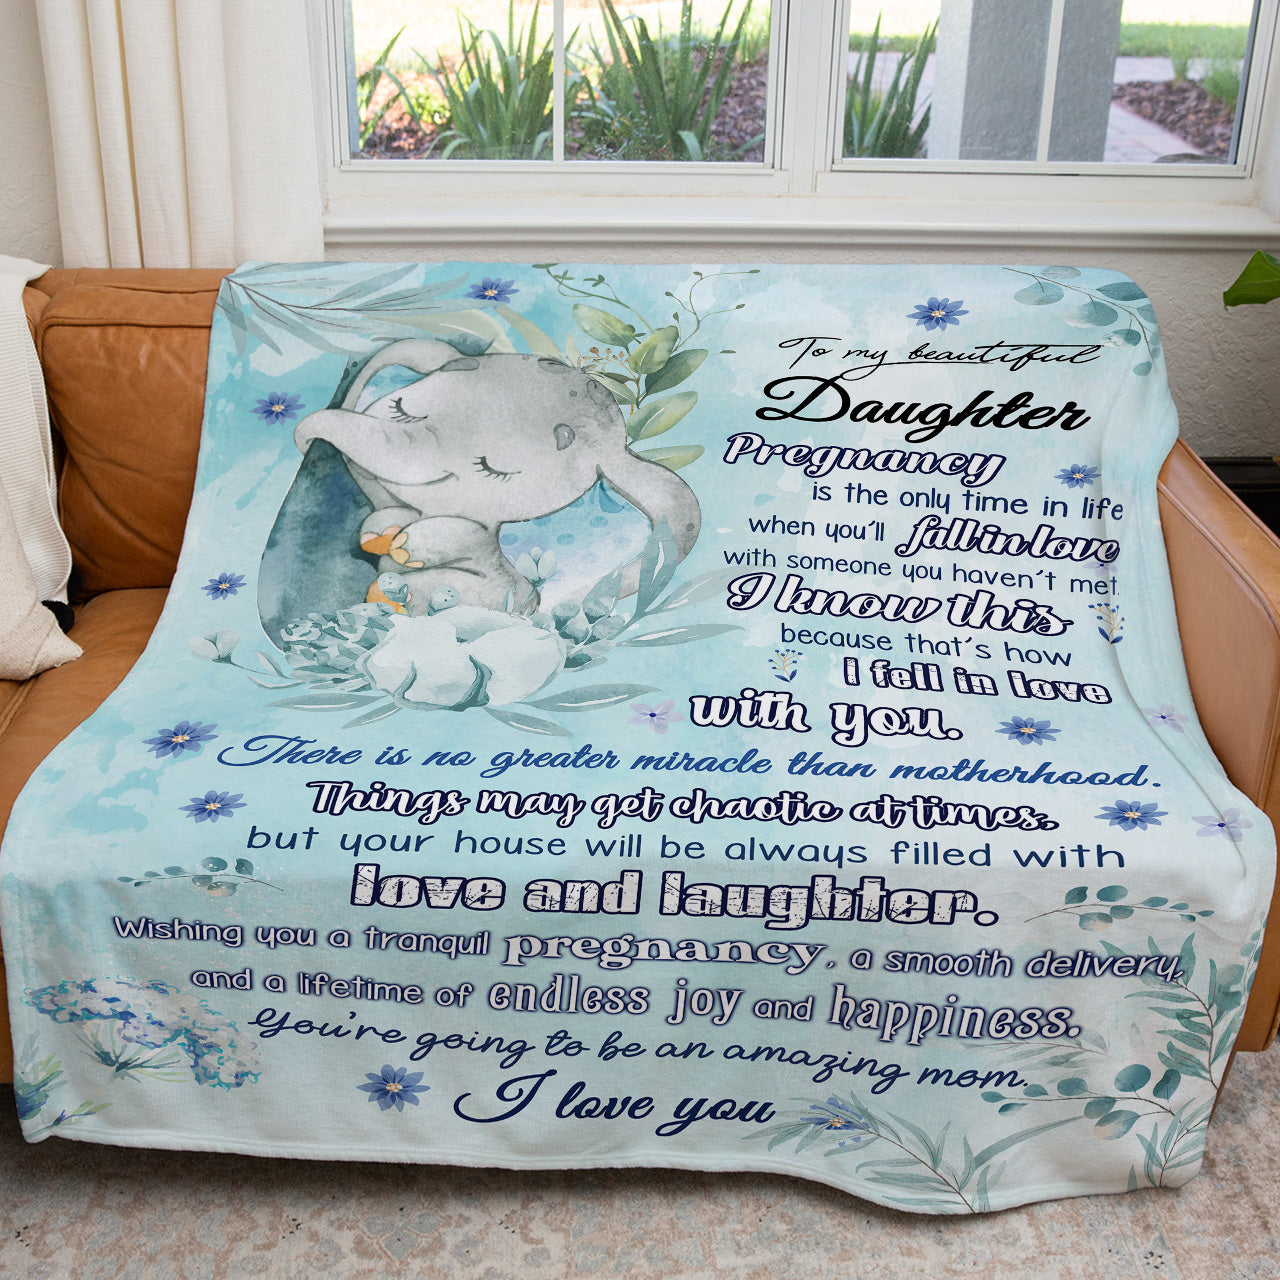 To My Daughter in Pregnancy Blanket Mothers Day Gift Ideas, Endless Joy and Happiness Blanket for Daughter